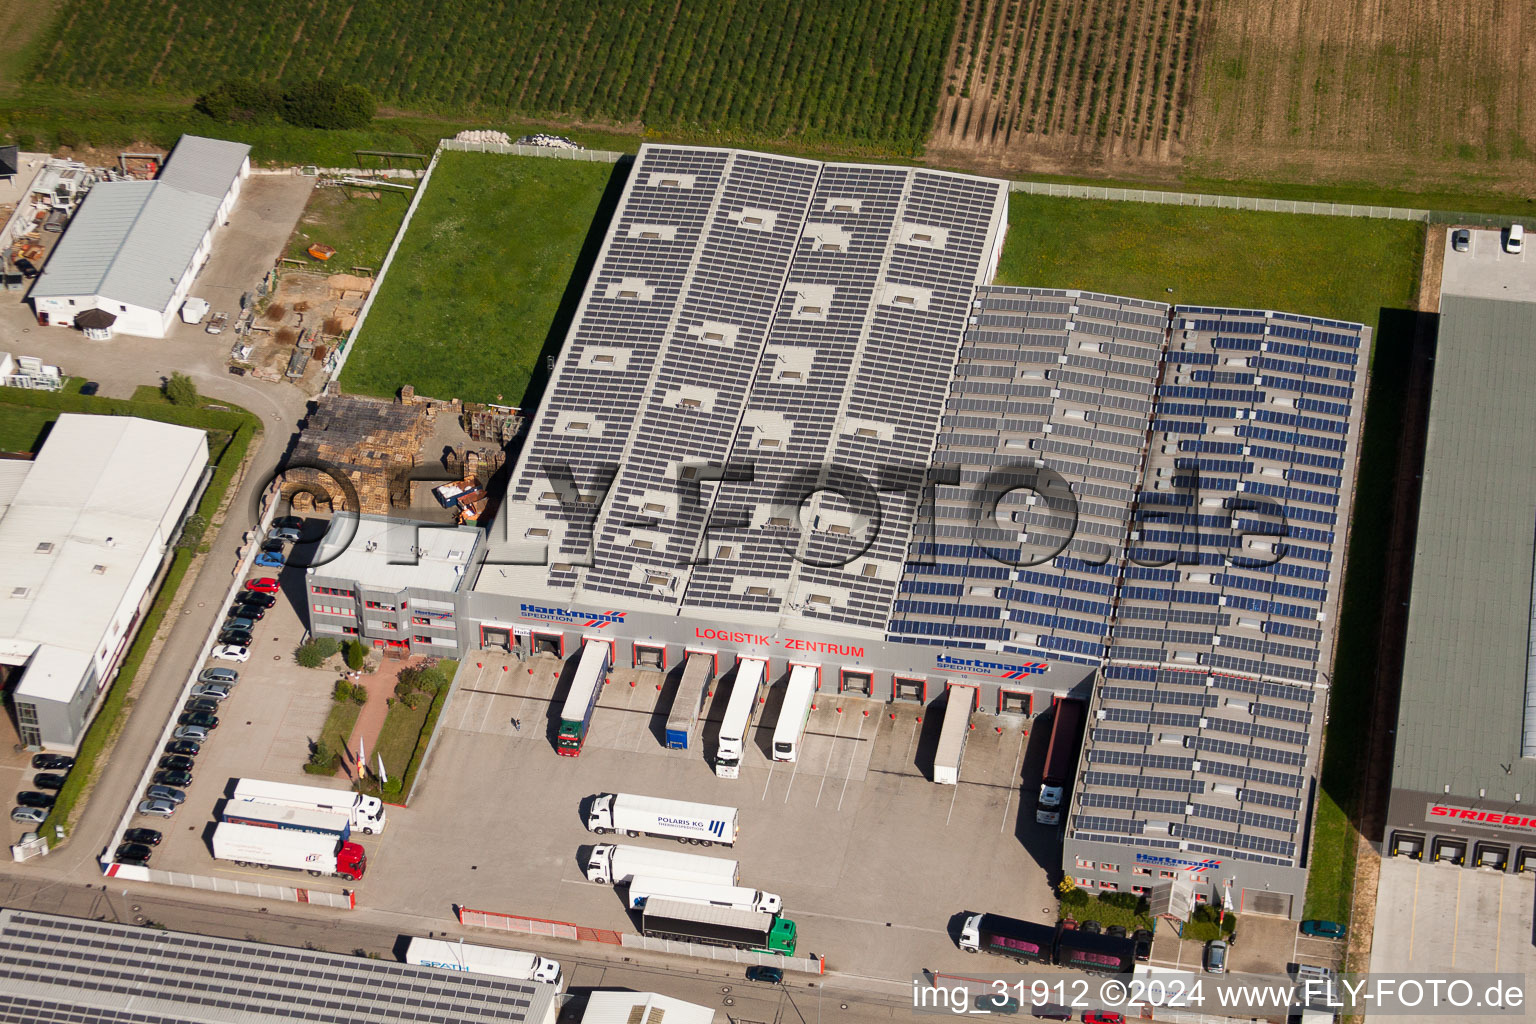 Aerial view of Schleifweg industrial area, forwarding company Hartmann logistics center in Muggensturm in the state Baden-Wuerttemberg, Germany